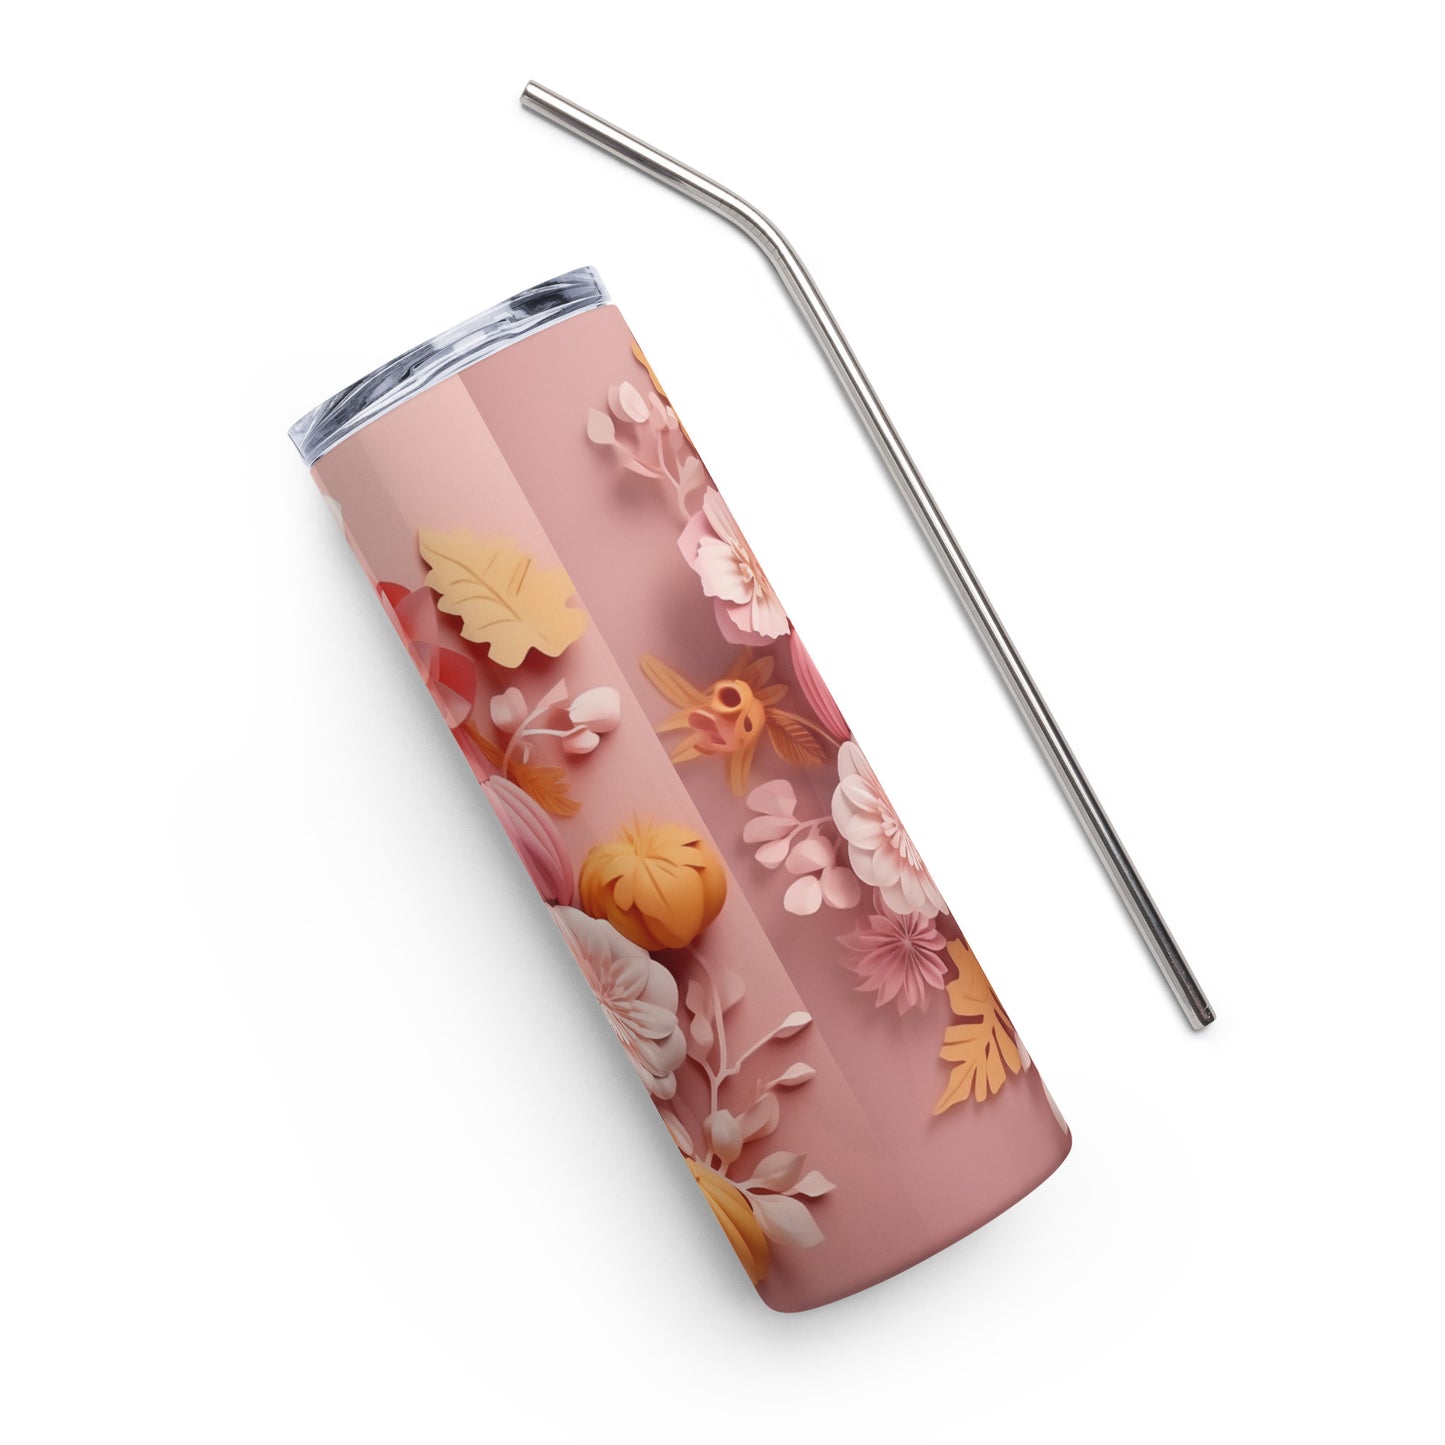 "Pink & Pretty Fall" 3D Stainless steel tumbler